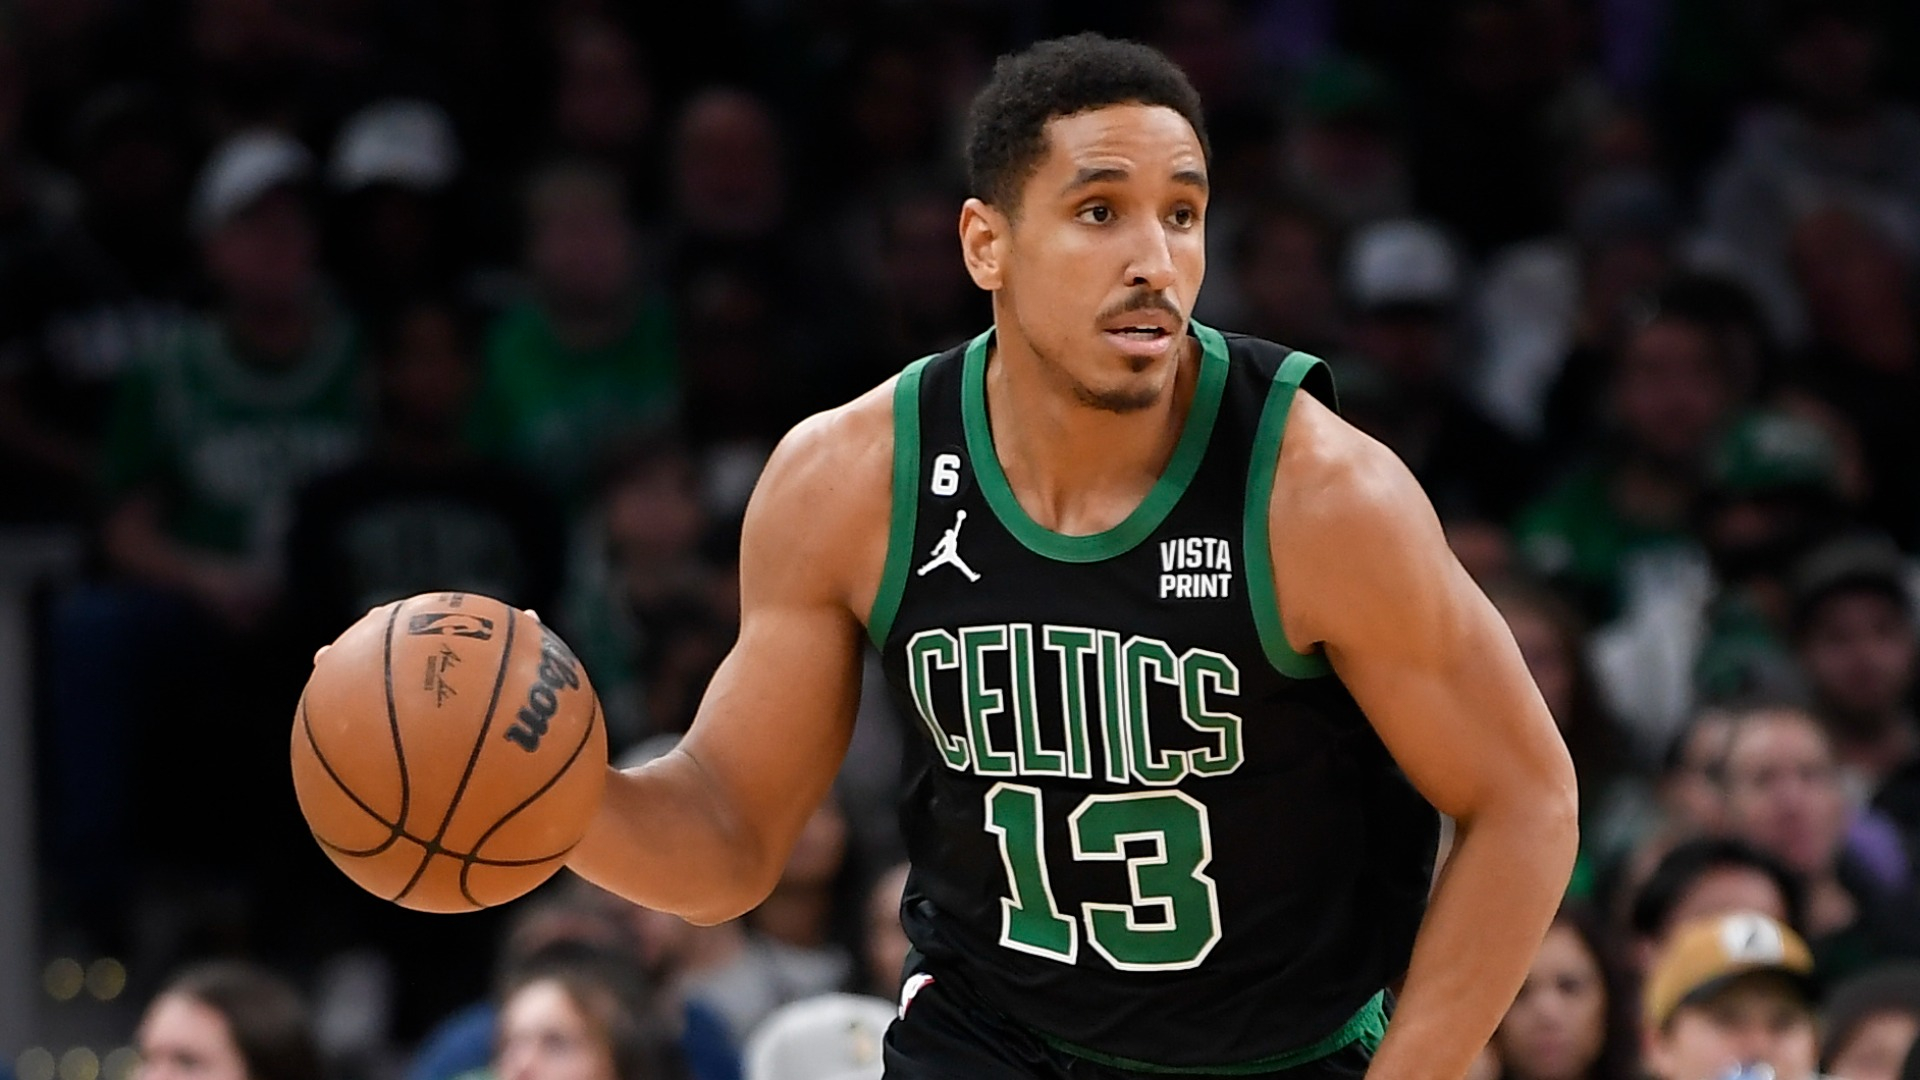 Malcolm Brogdon in the middle of the Celtics offseason plans